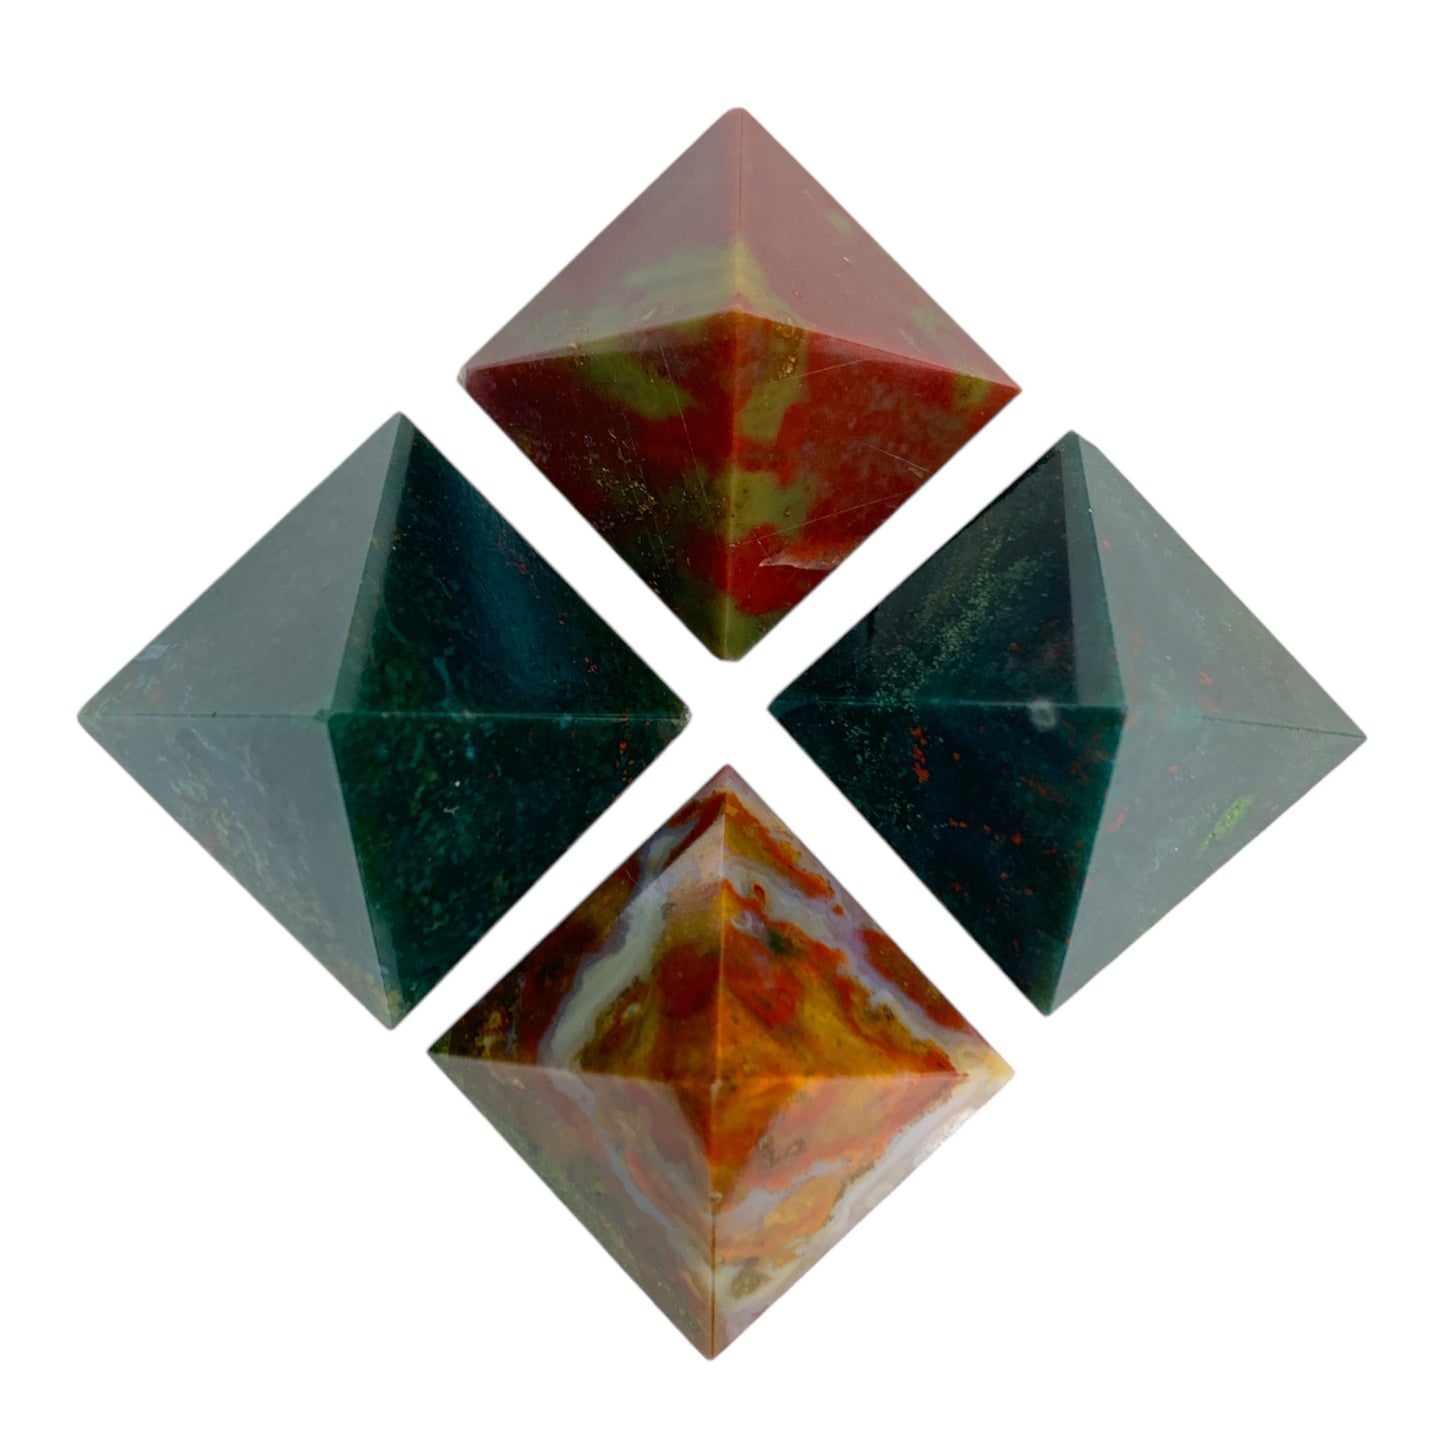 Blood Stone - Small Pyramids - 23 to 28mm - Price per piece 15g - Order in 5's - NEW121